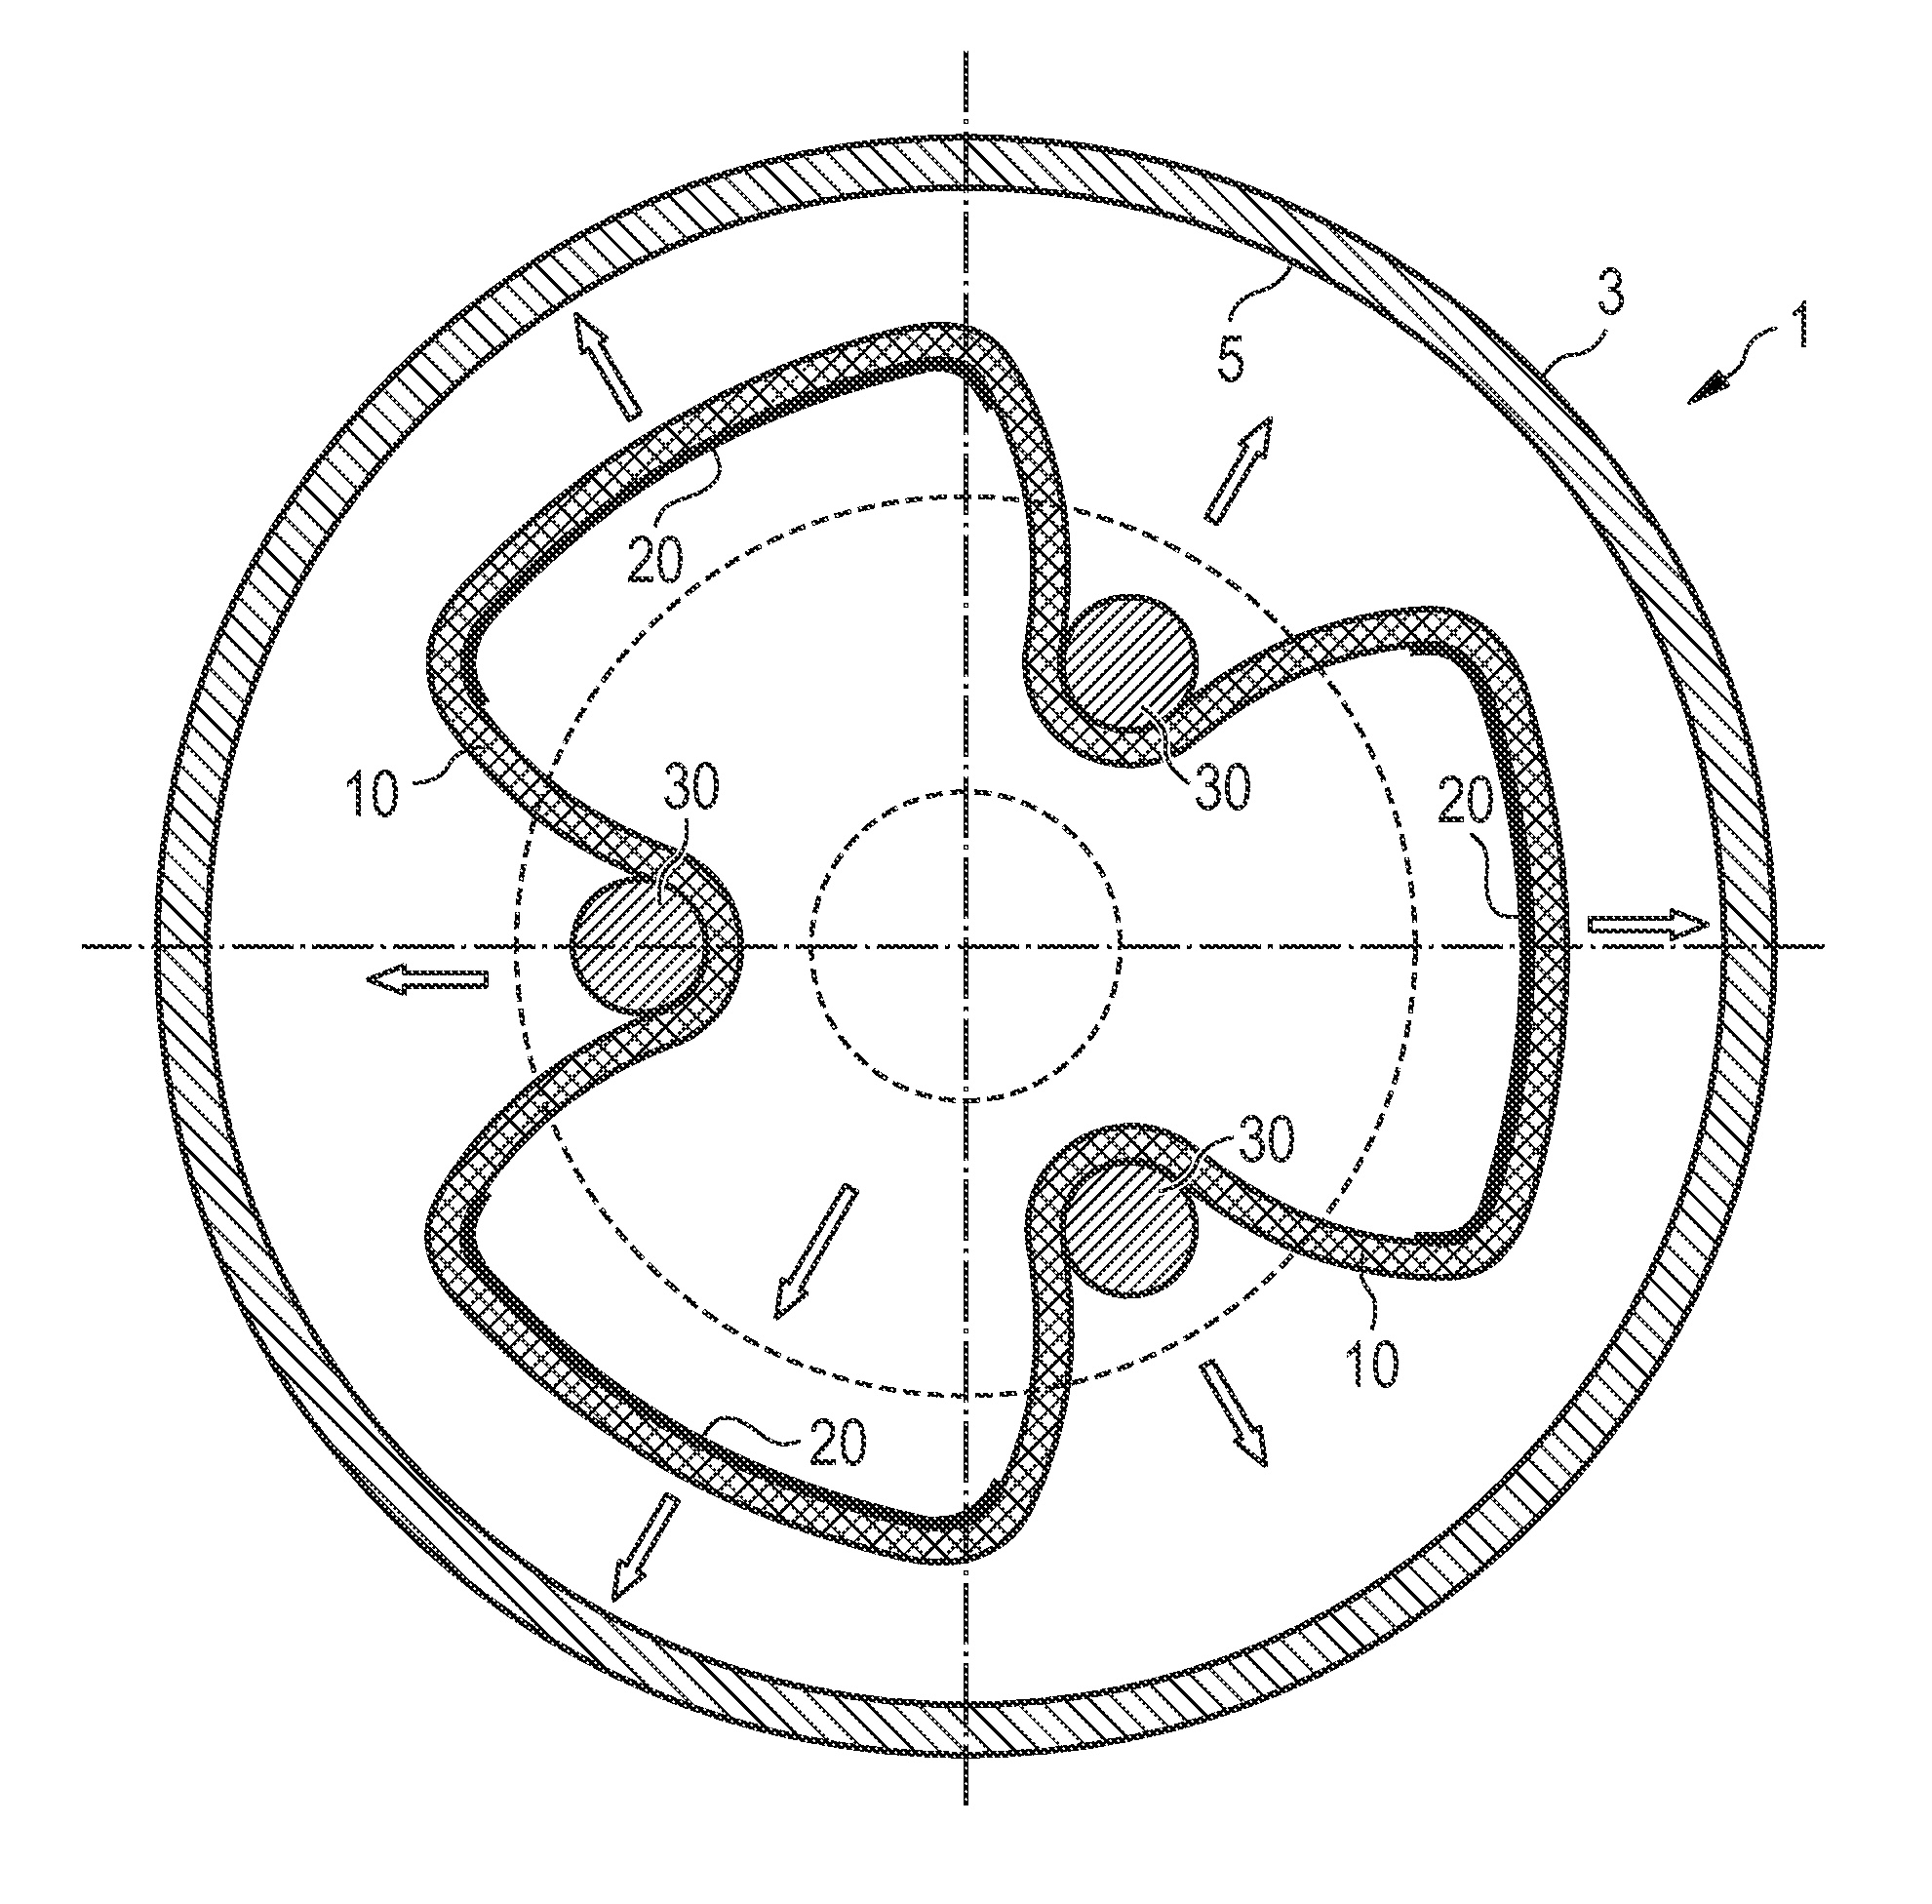 Method of applying an annular strip to a tire